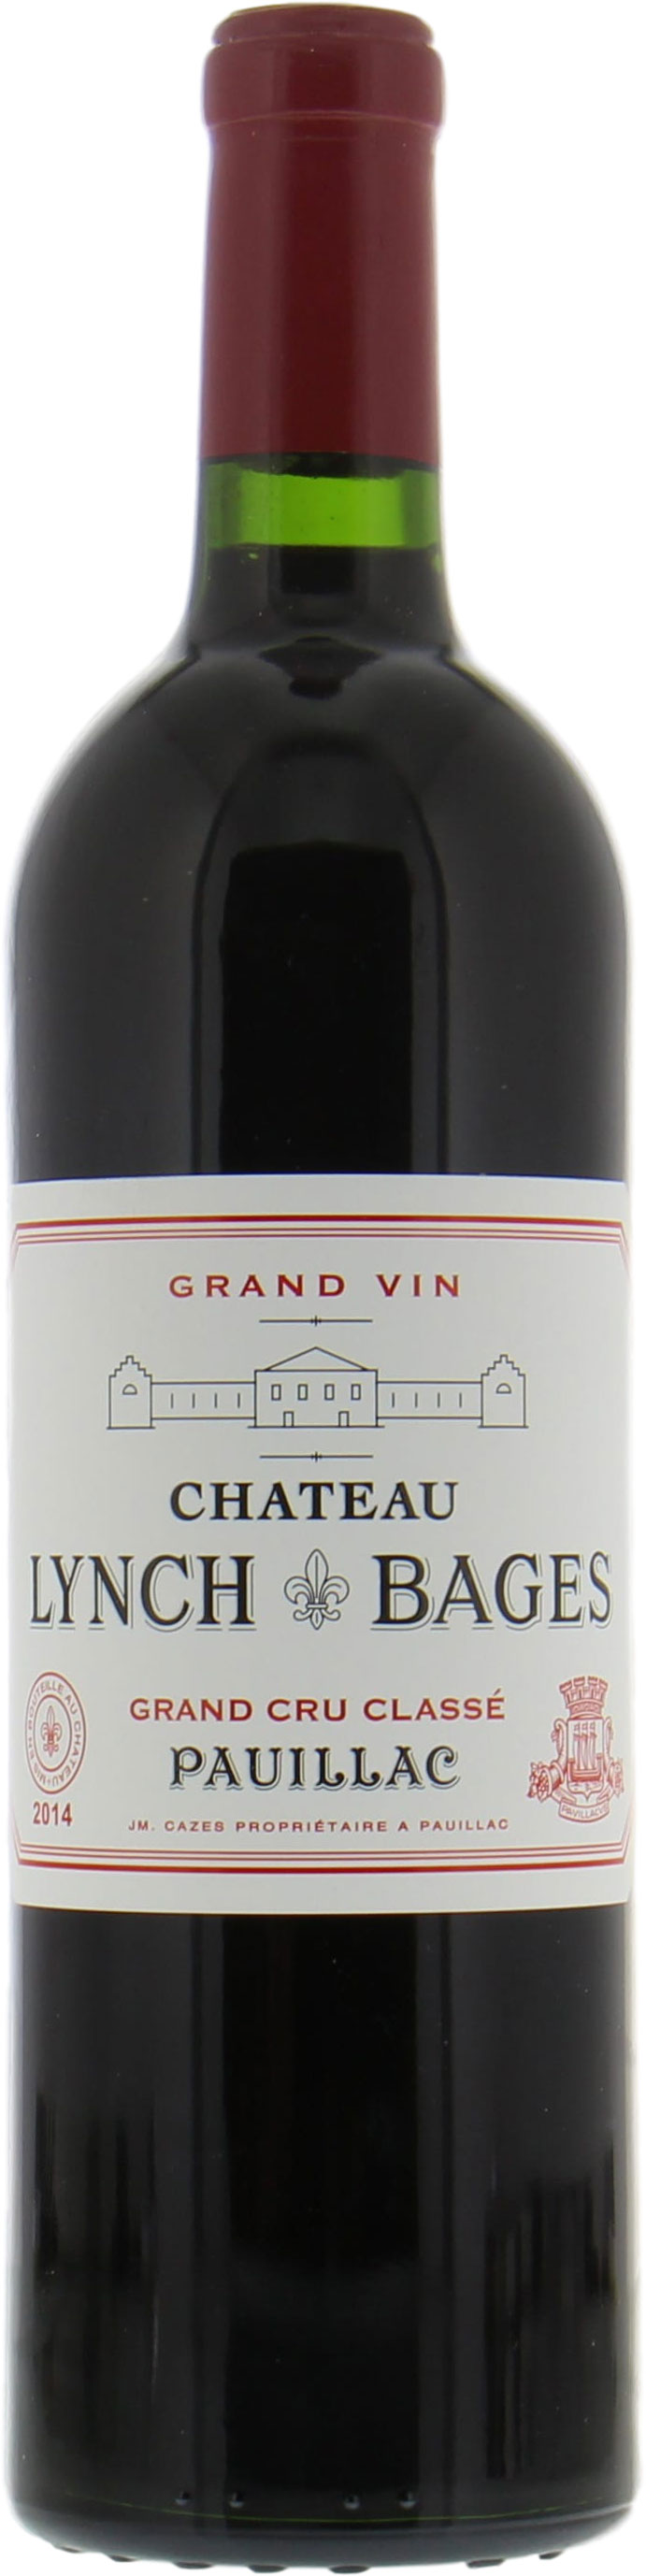 Chateau Lynch Bages - Chateau Lynch Bages 2014